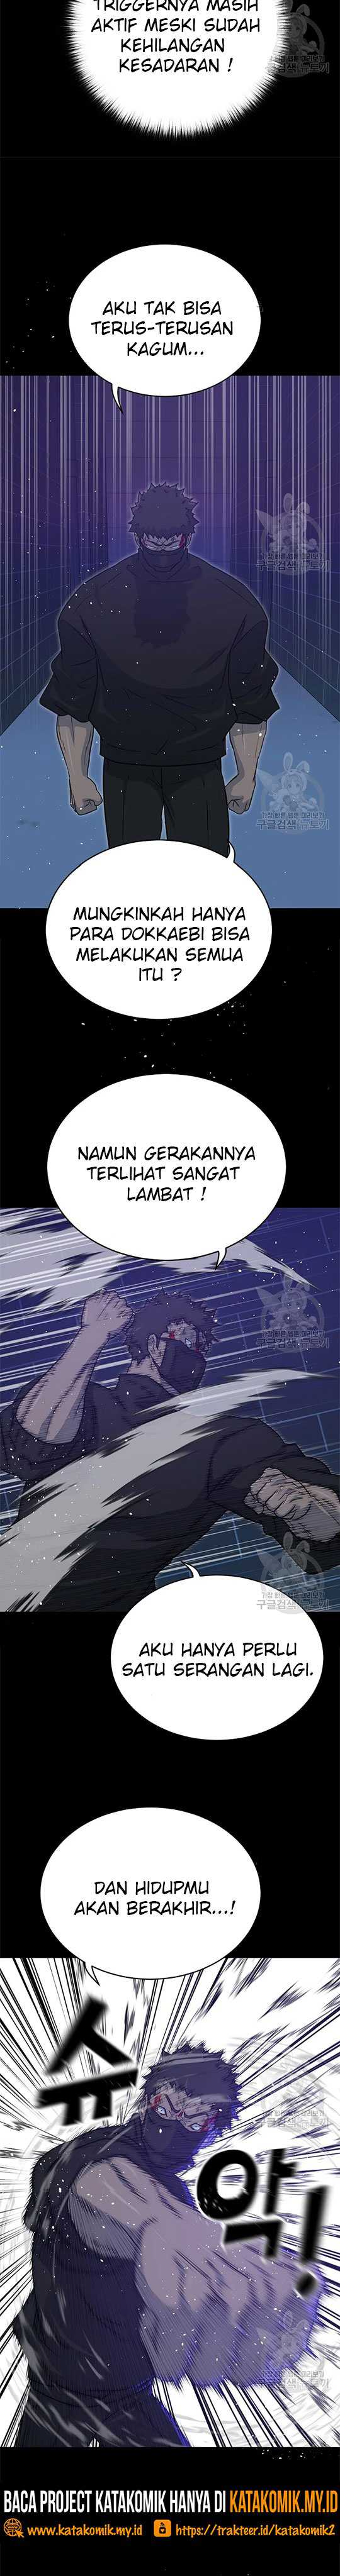 Trigger Chapter 99